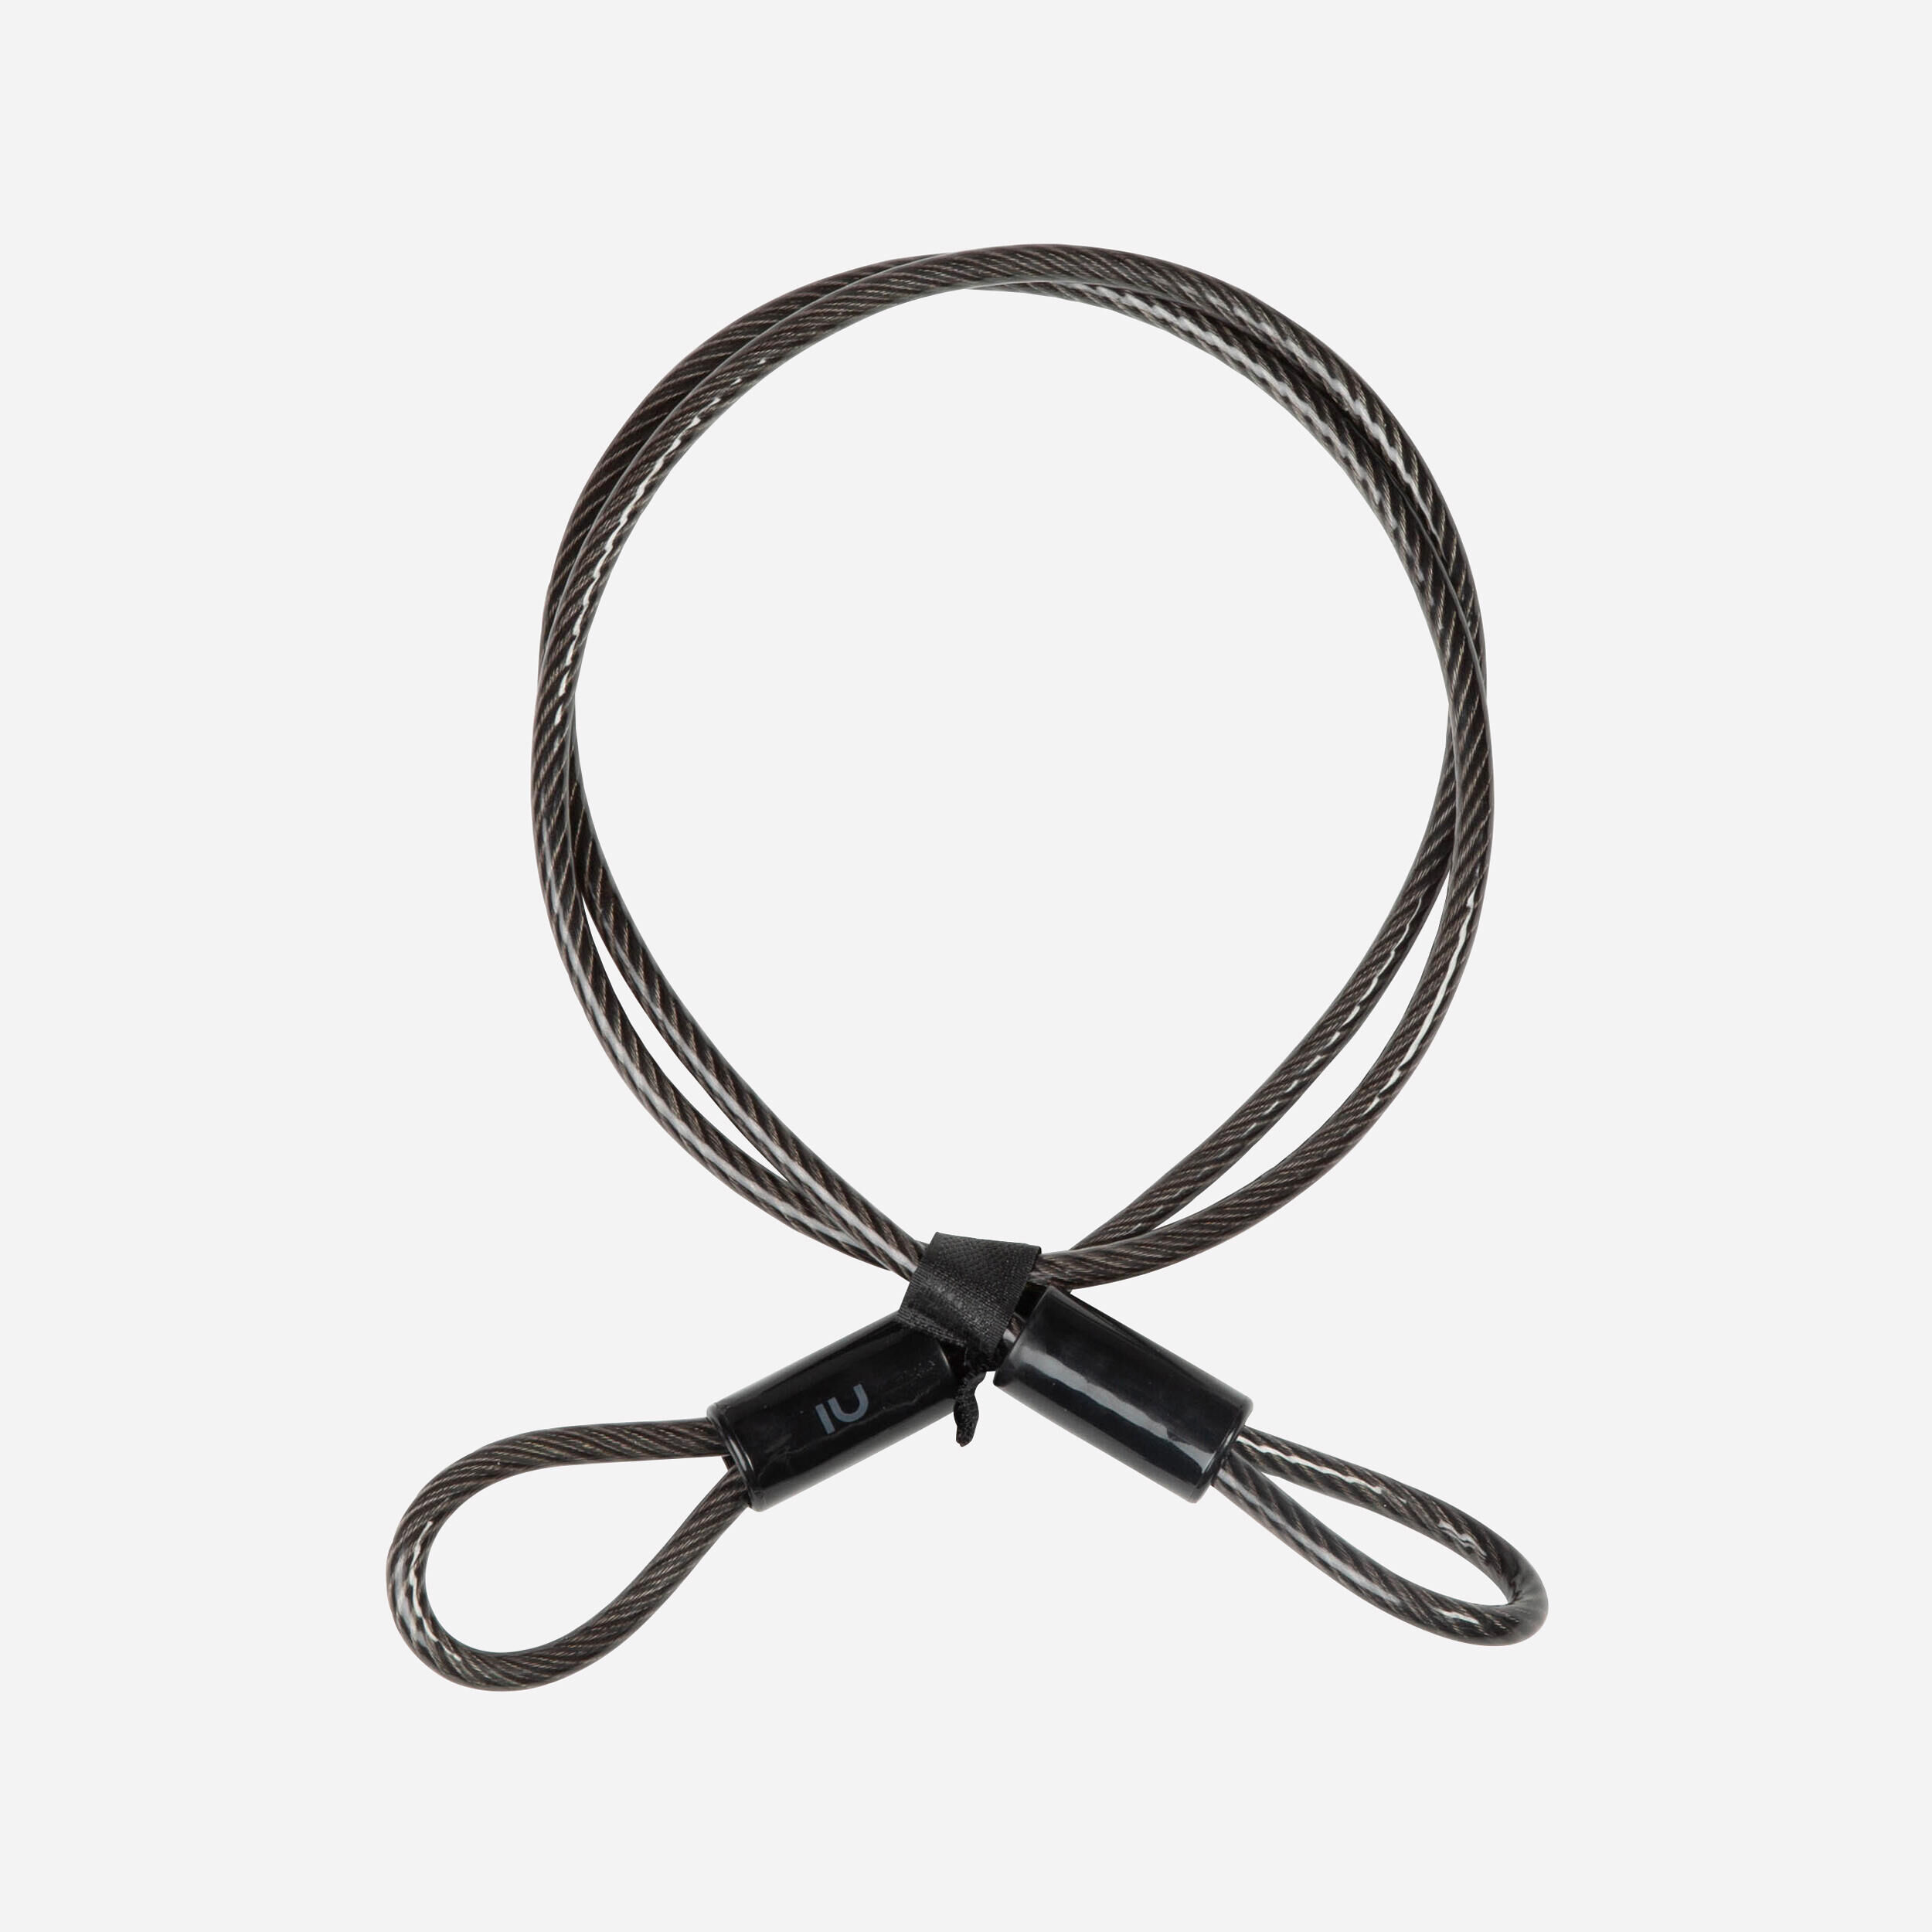 BTWIN Additional Anti-Theft Cable